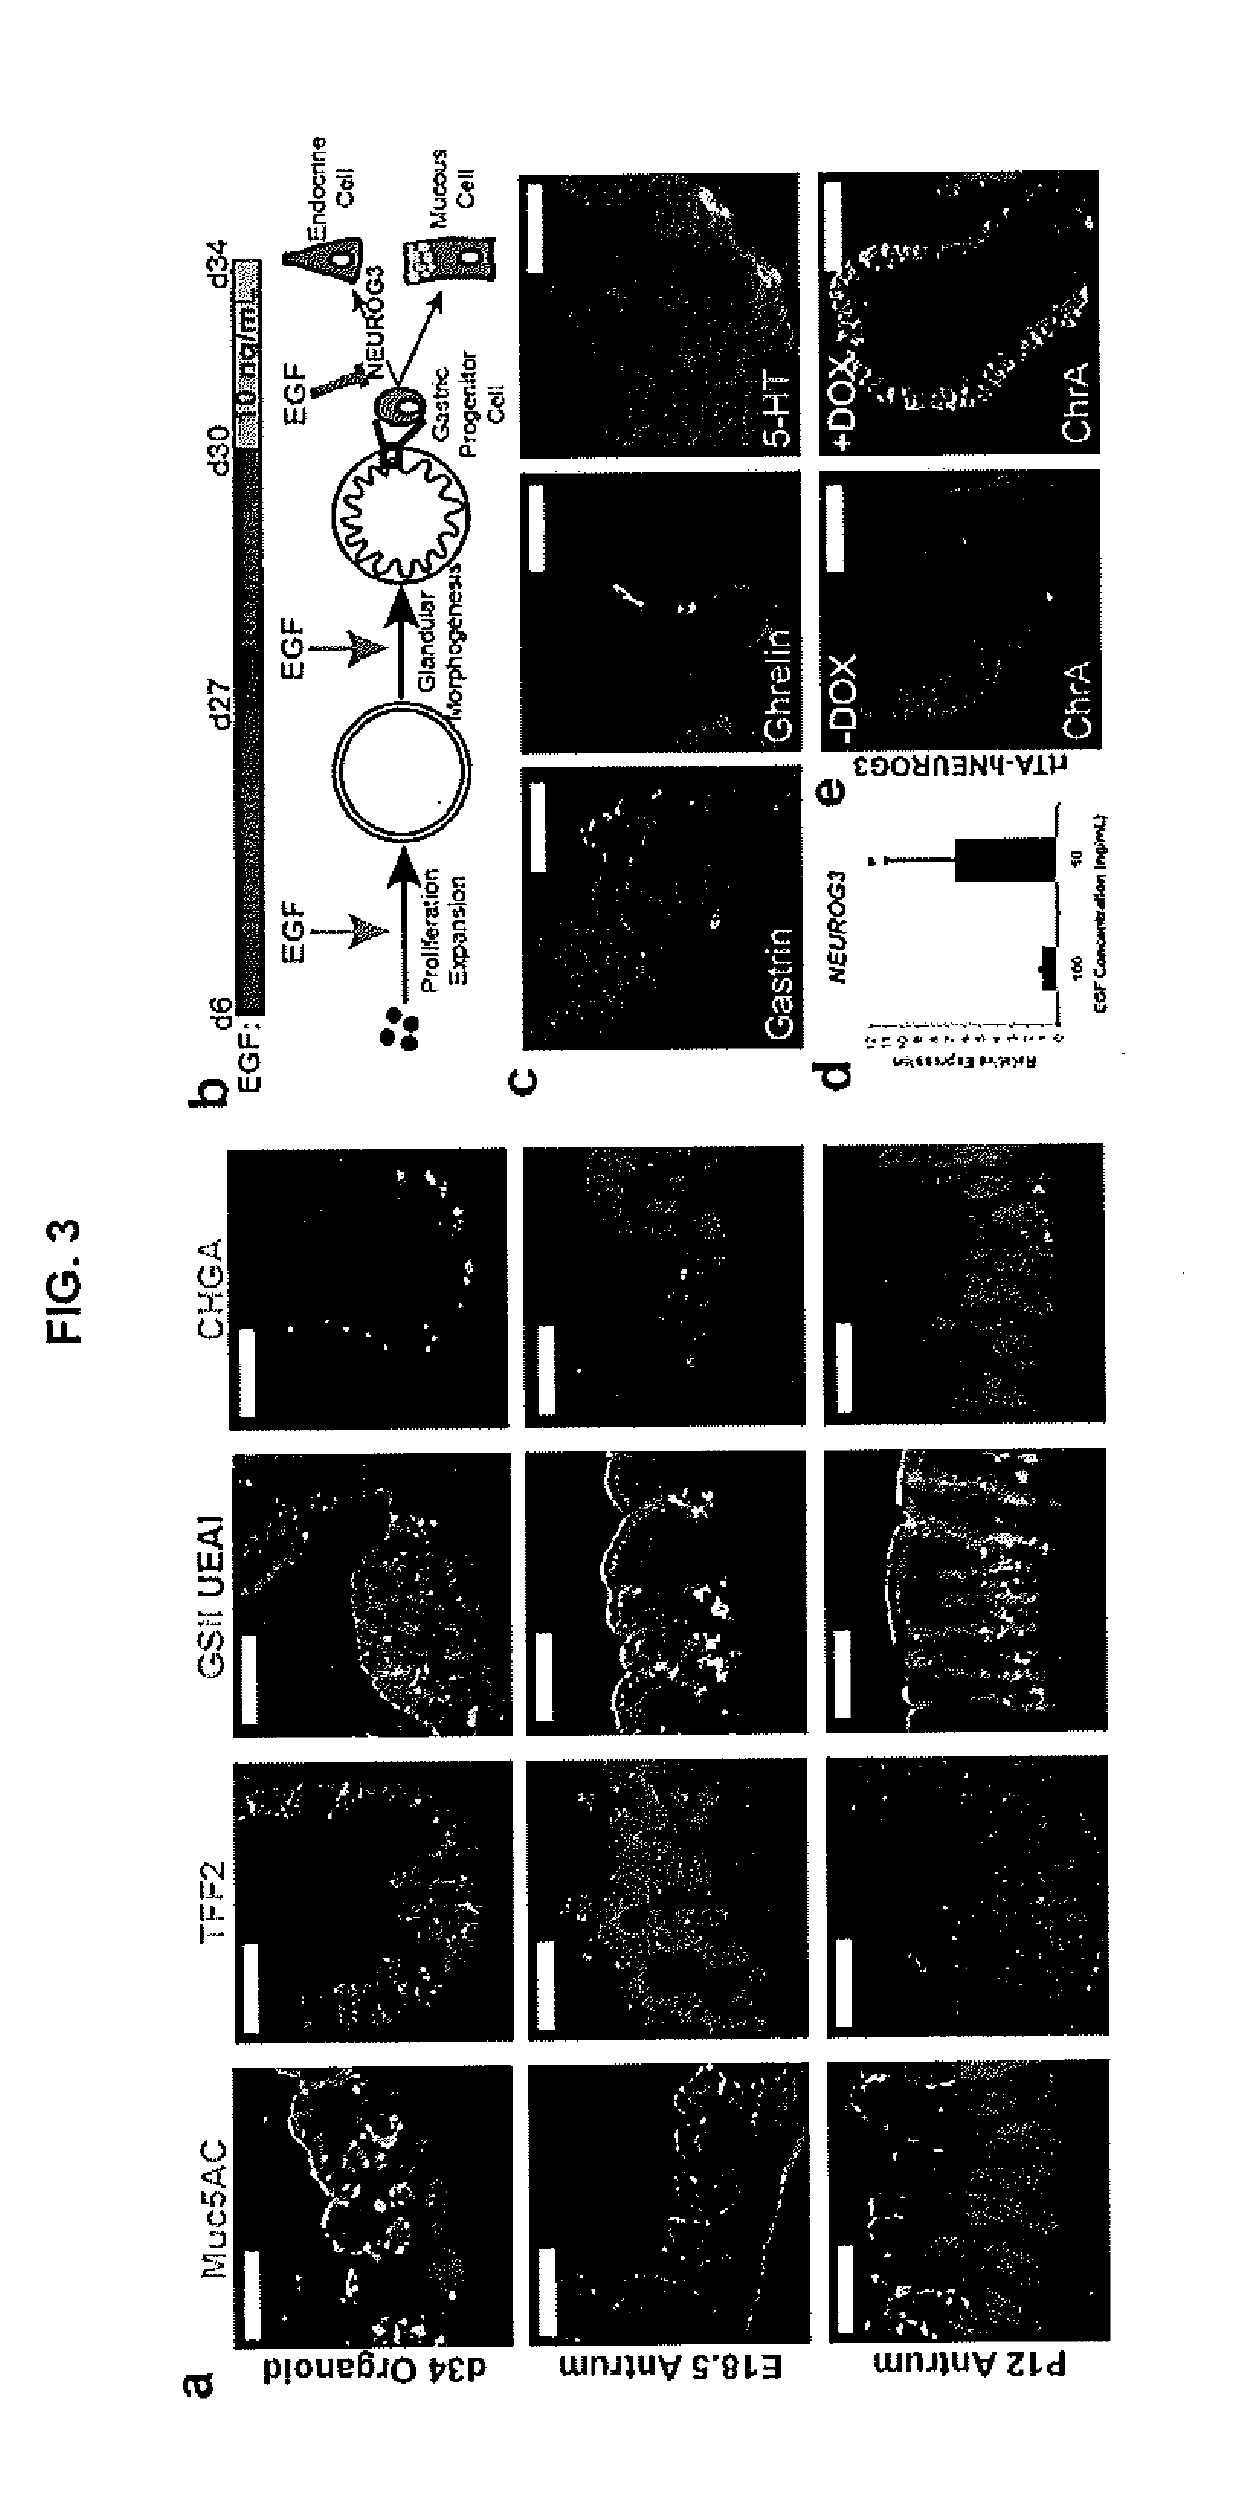 Methods and systems for converting precursor cells into gastric tissues through directed differentiation